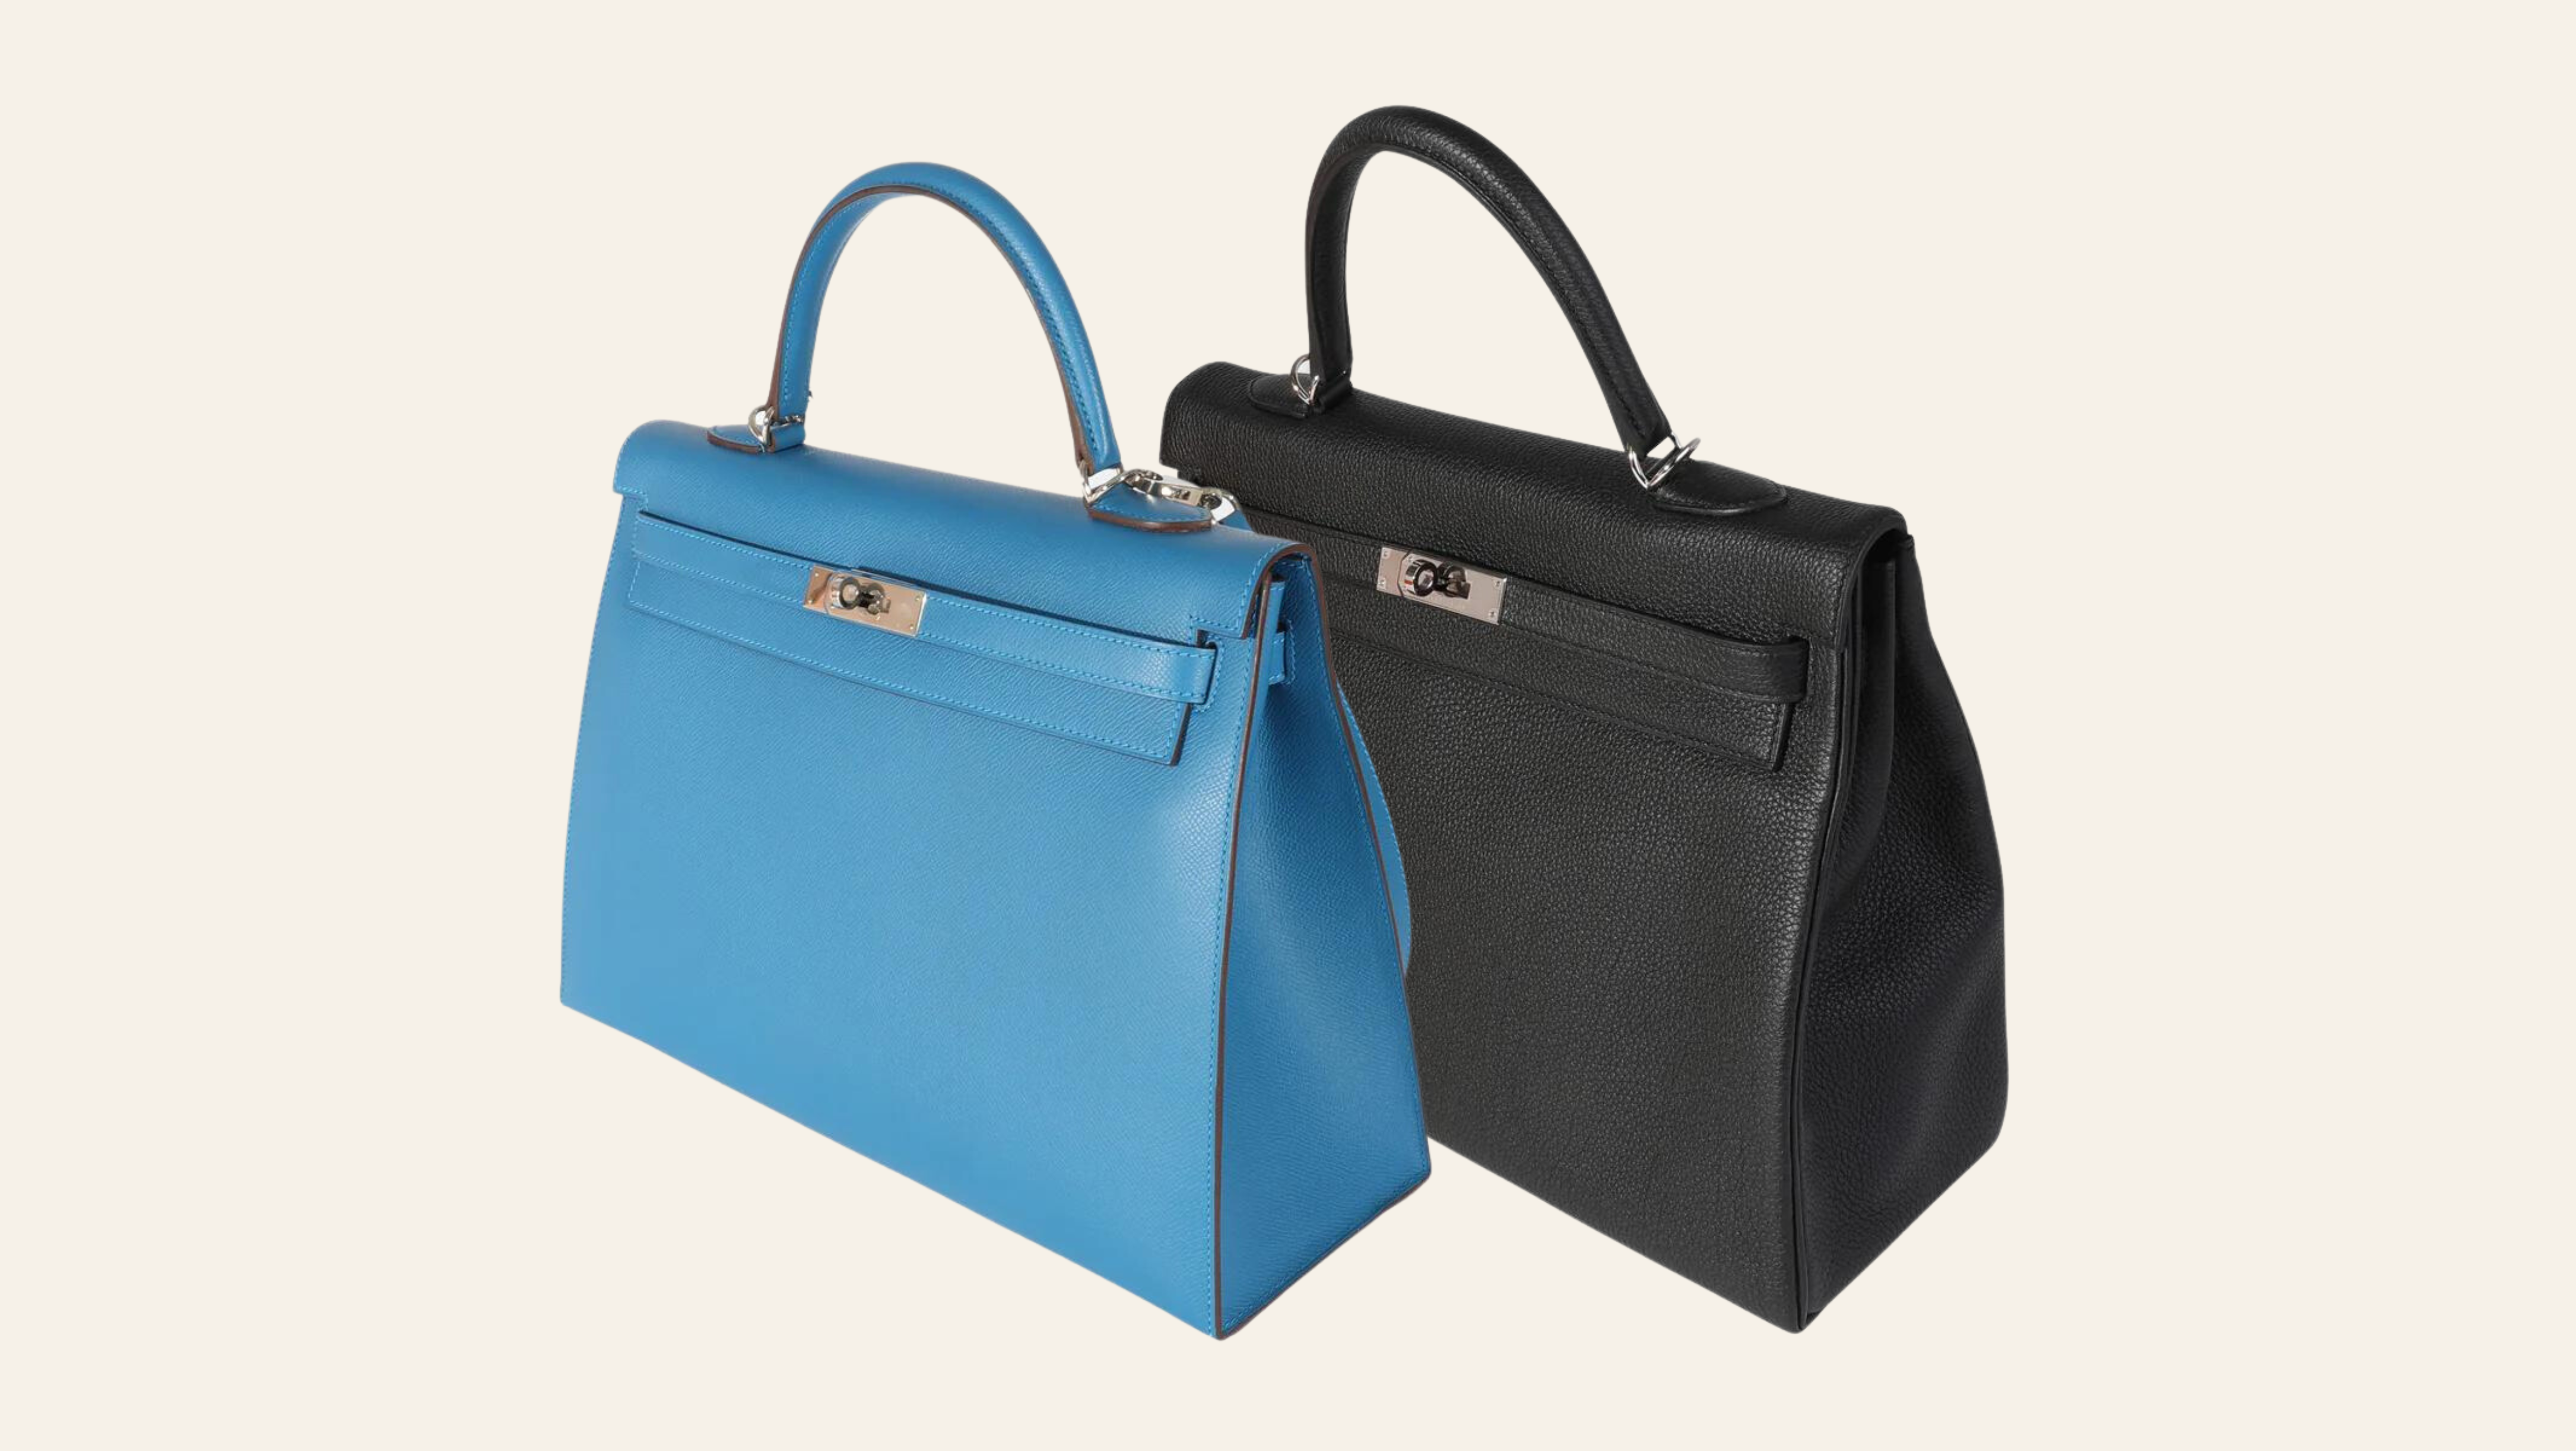 HERMES KELLY 25 RETOURNE - WHATS IN MY BAG 